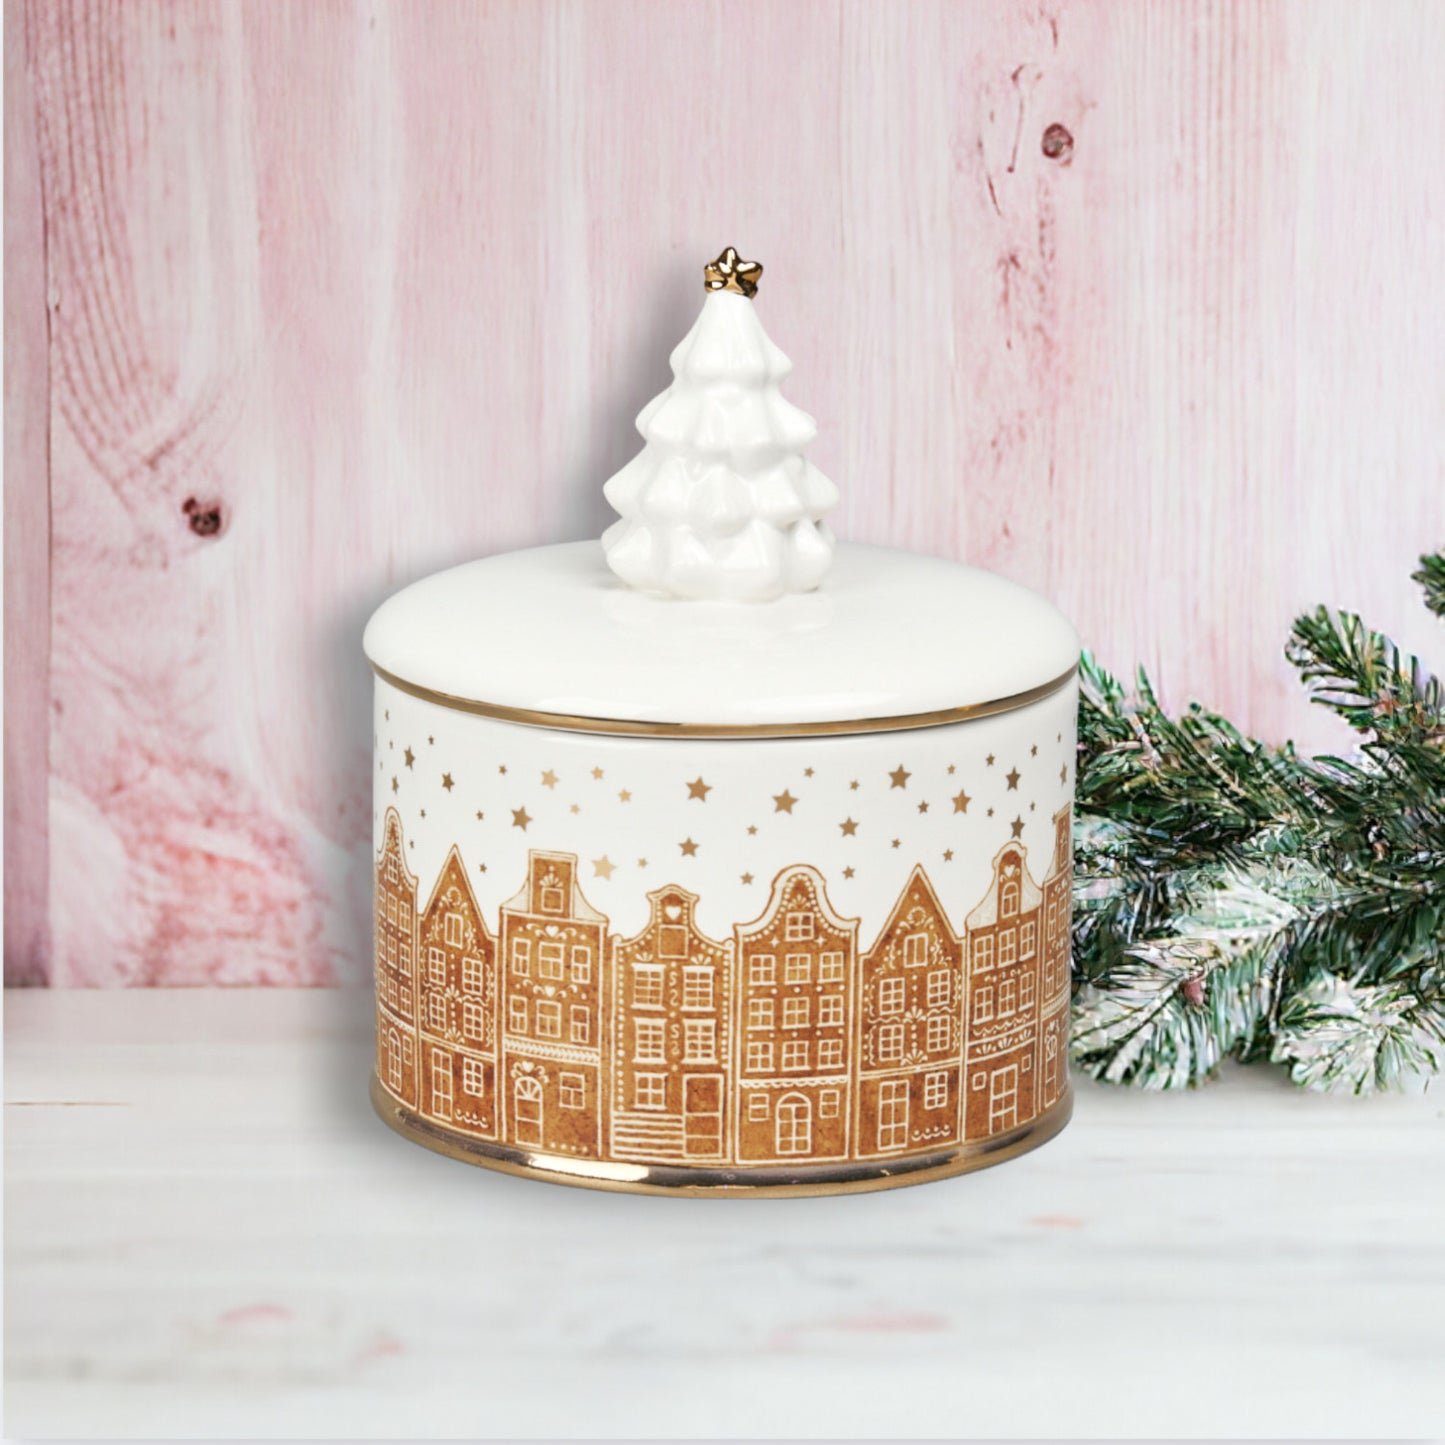 December Diamonds Gingerbread Village Gingerbread Brownstone Bowl With Lid